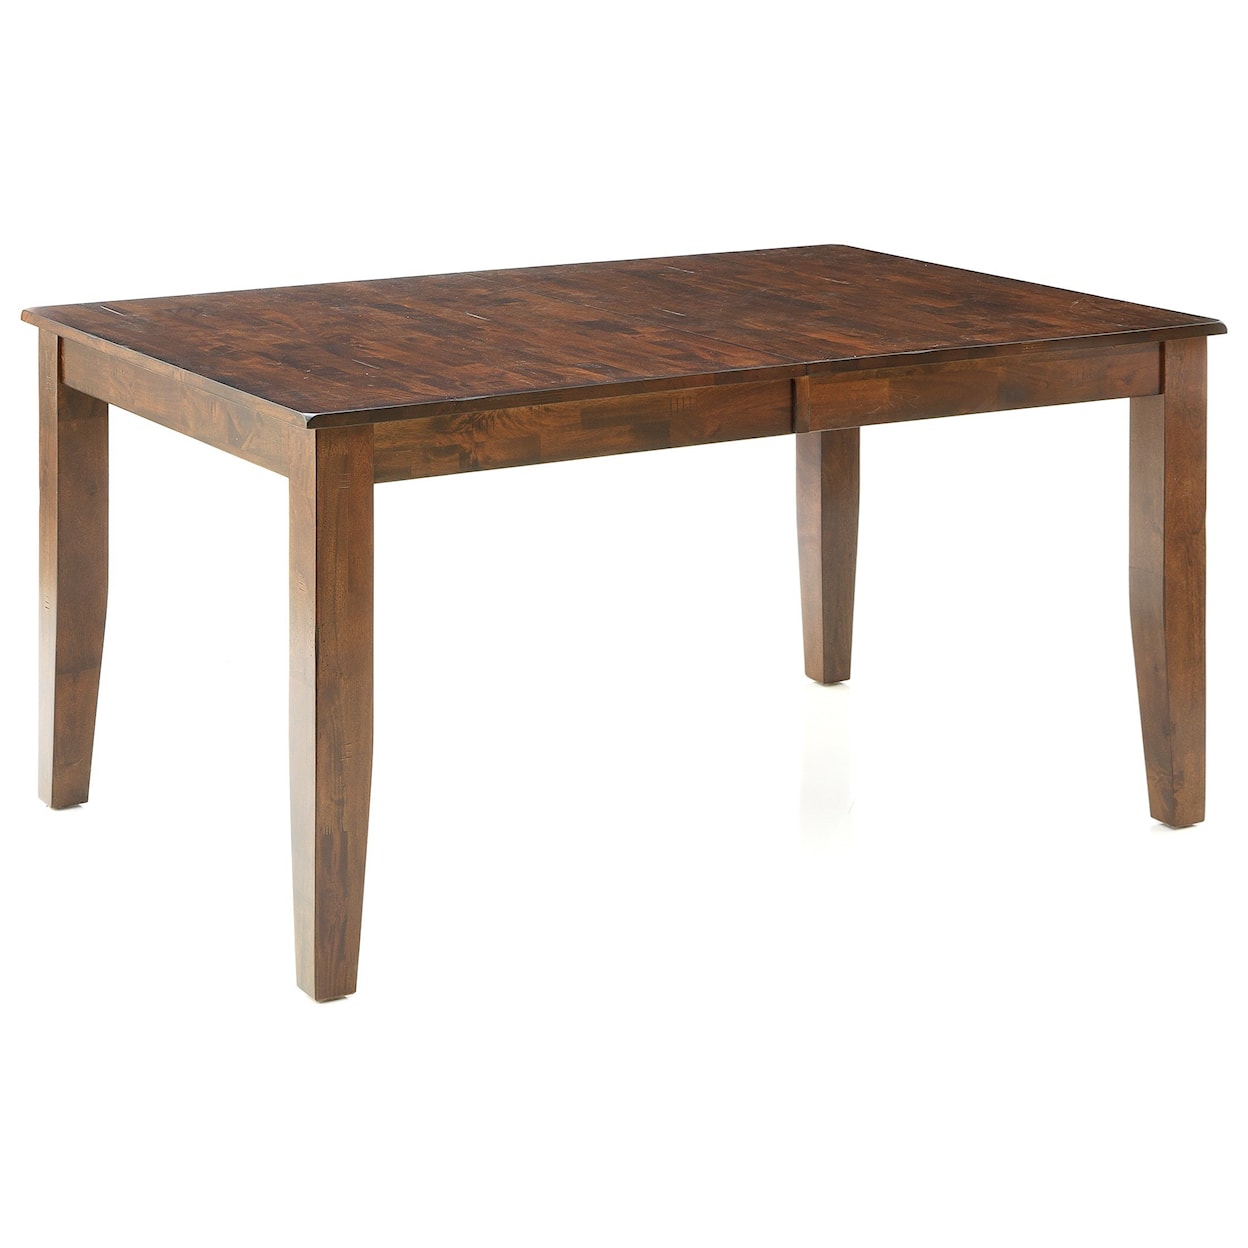 Intercon 13215 Dining Table with Butterfly Leaf